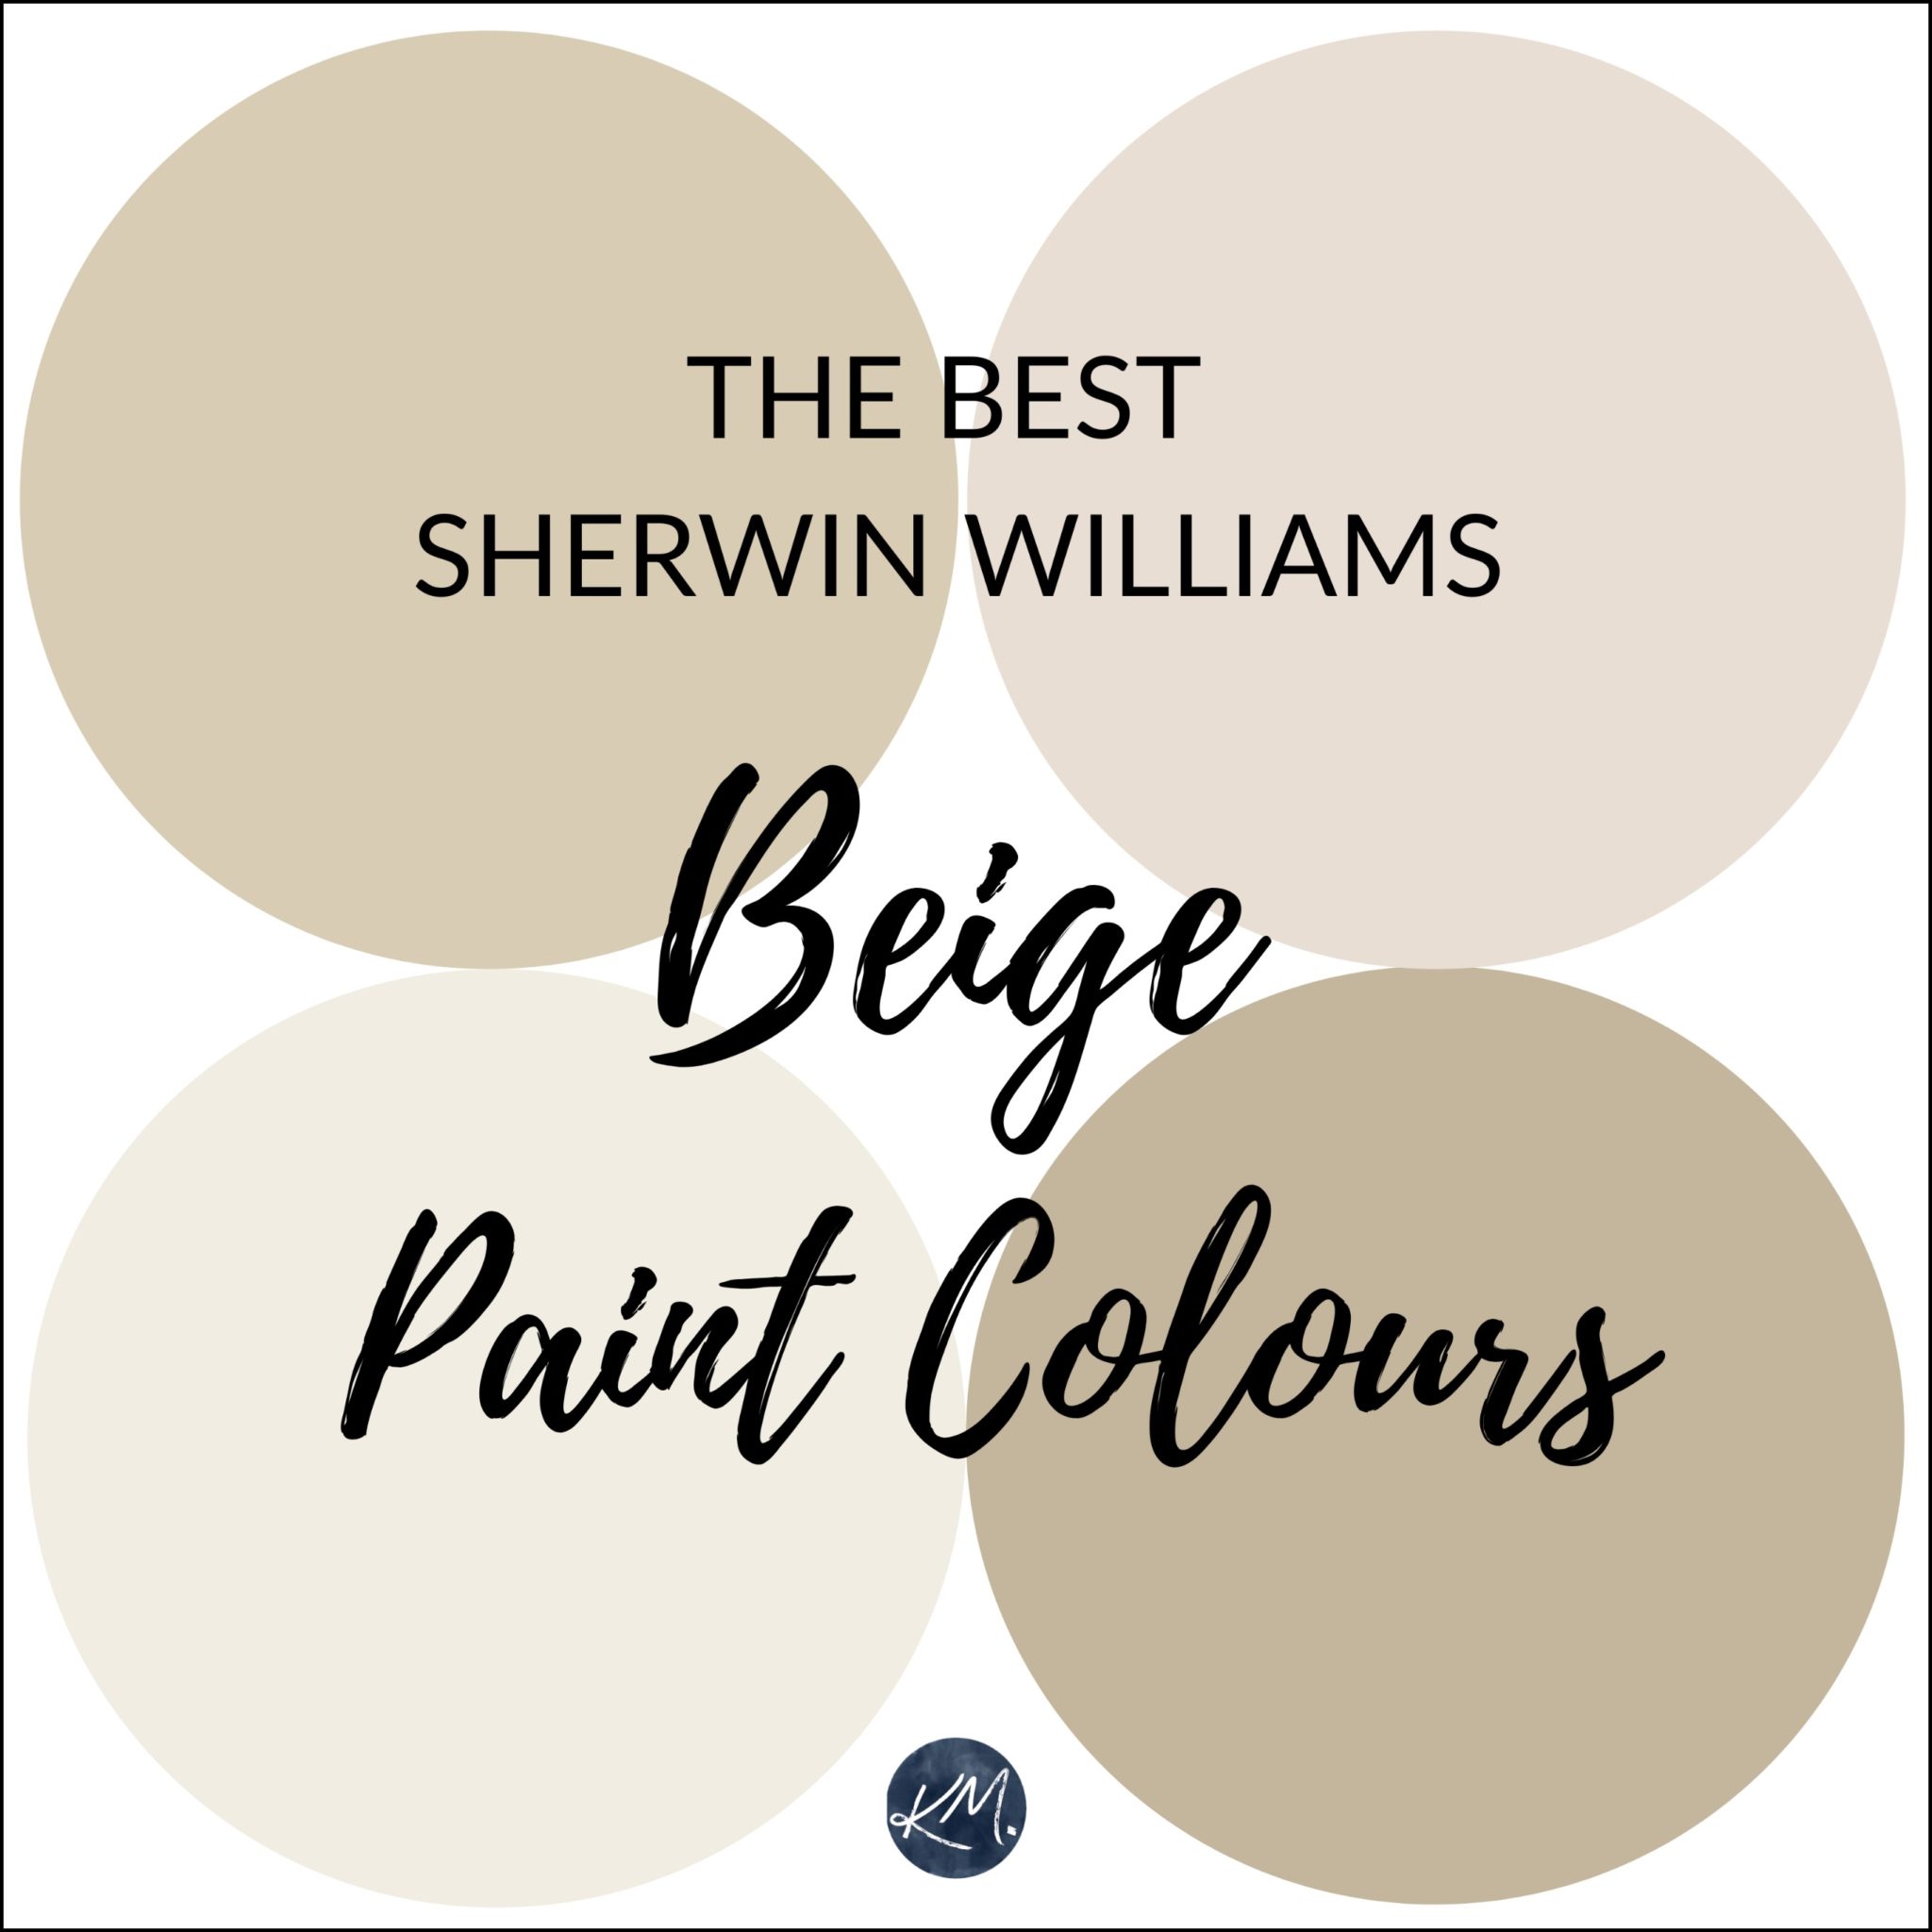 Sherwin Williams 5 Best Neutral Beige Paint Colors With A Bit More